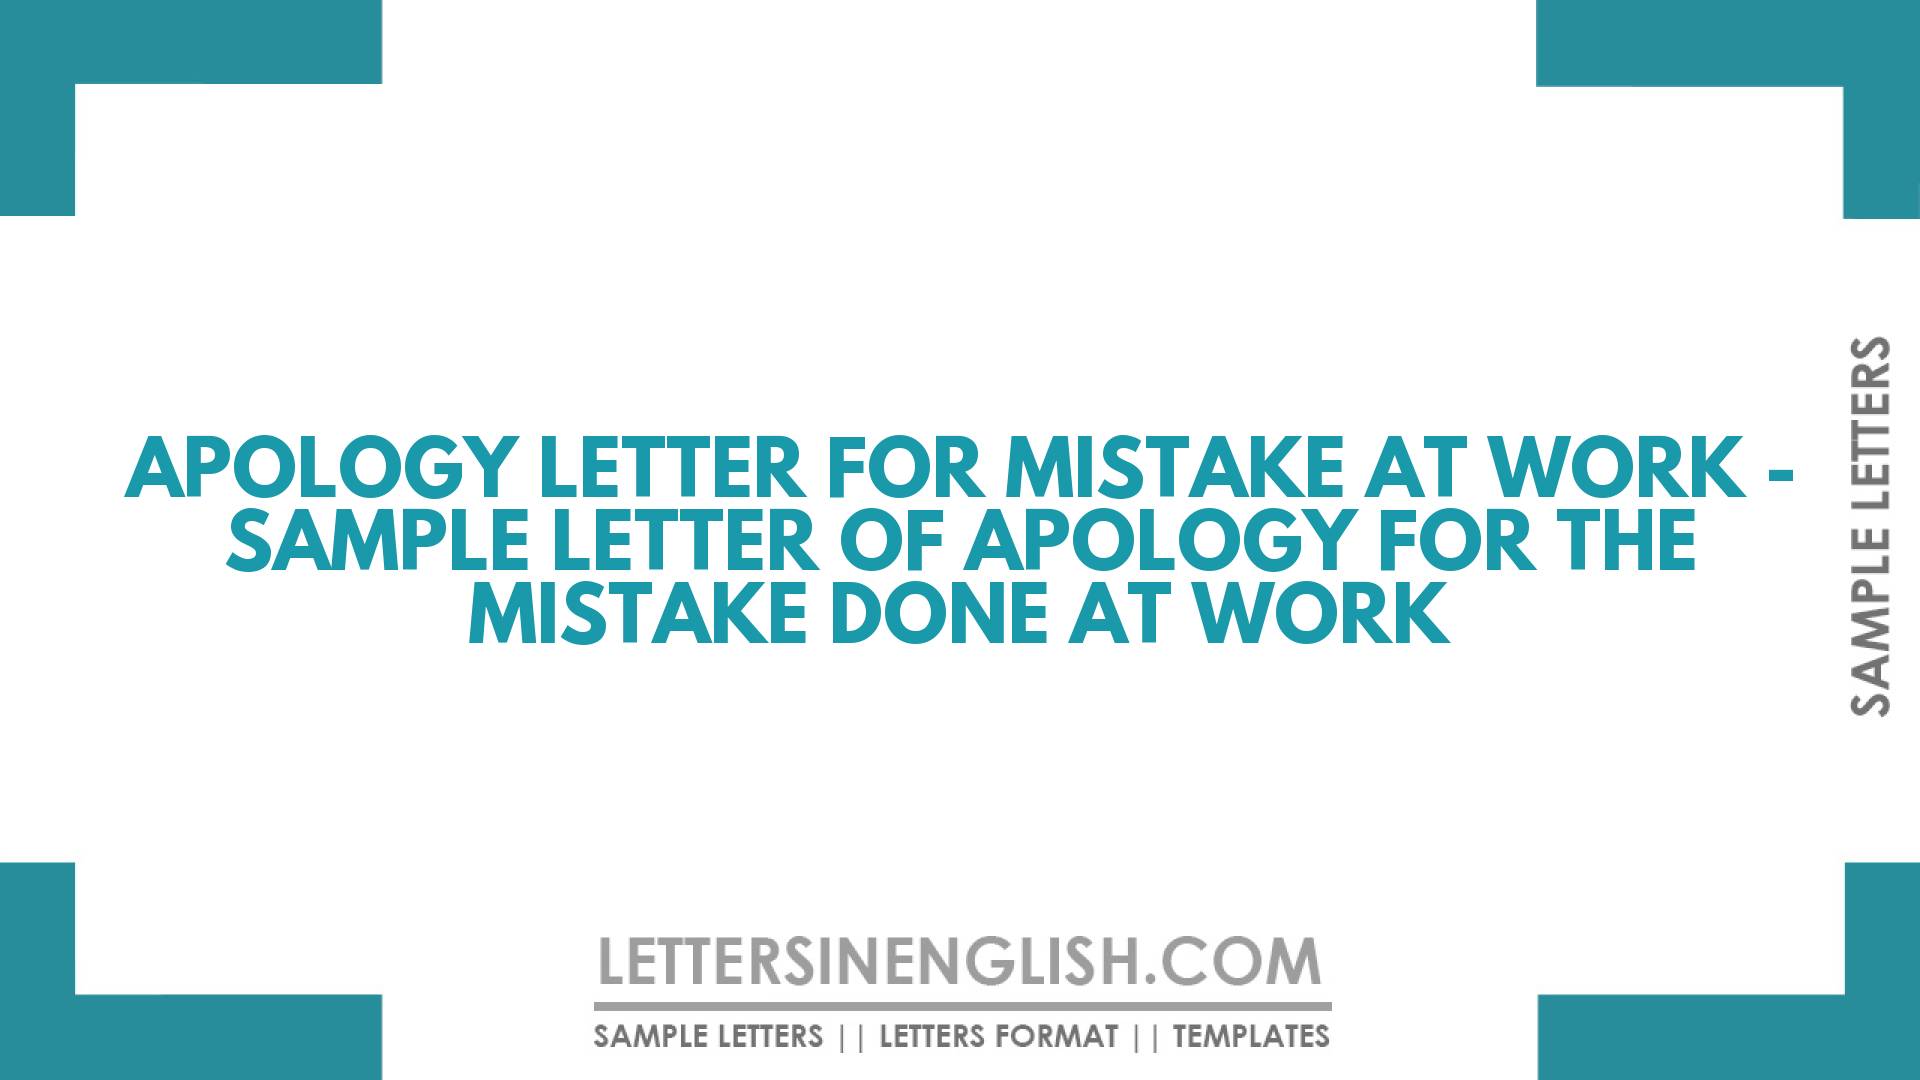 apology-letter-for-mistake-at-work-sample-letter-of-apology-for-the-mistake-done-at-work